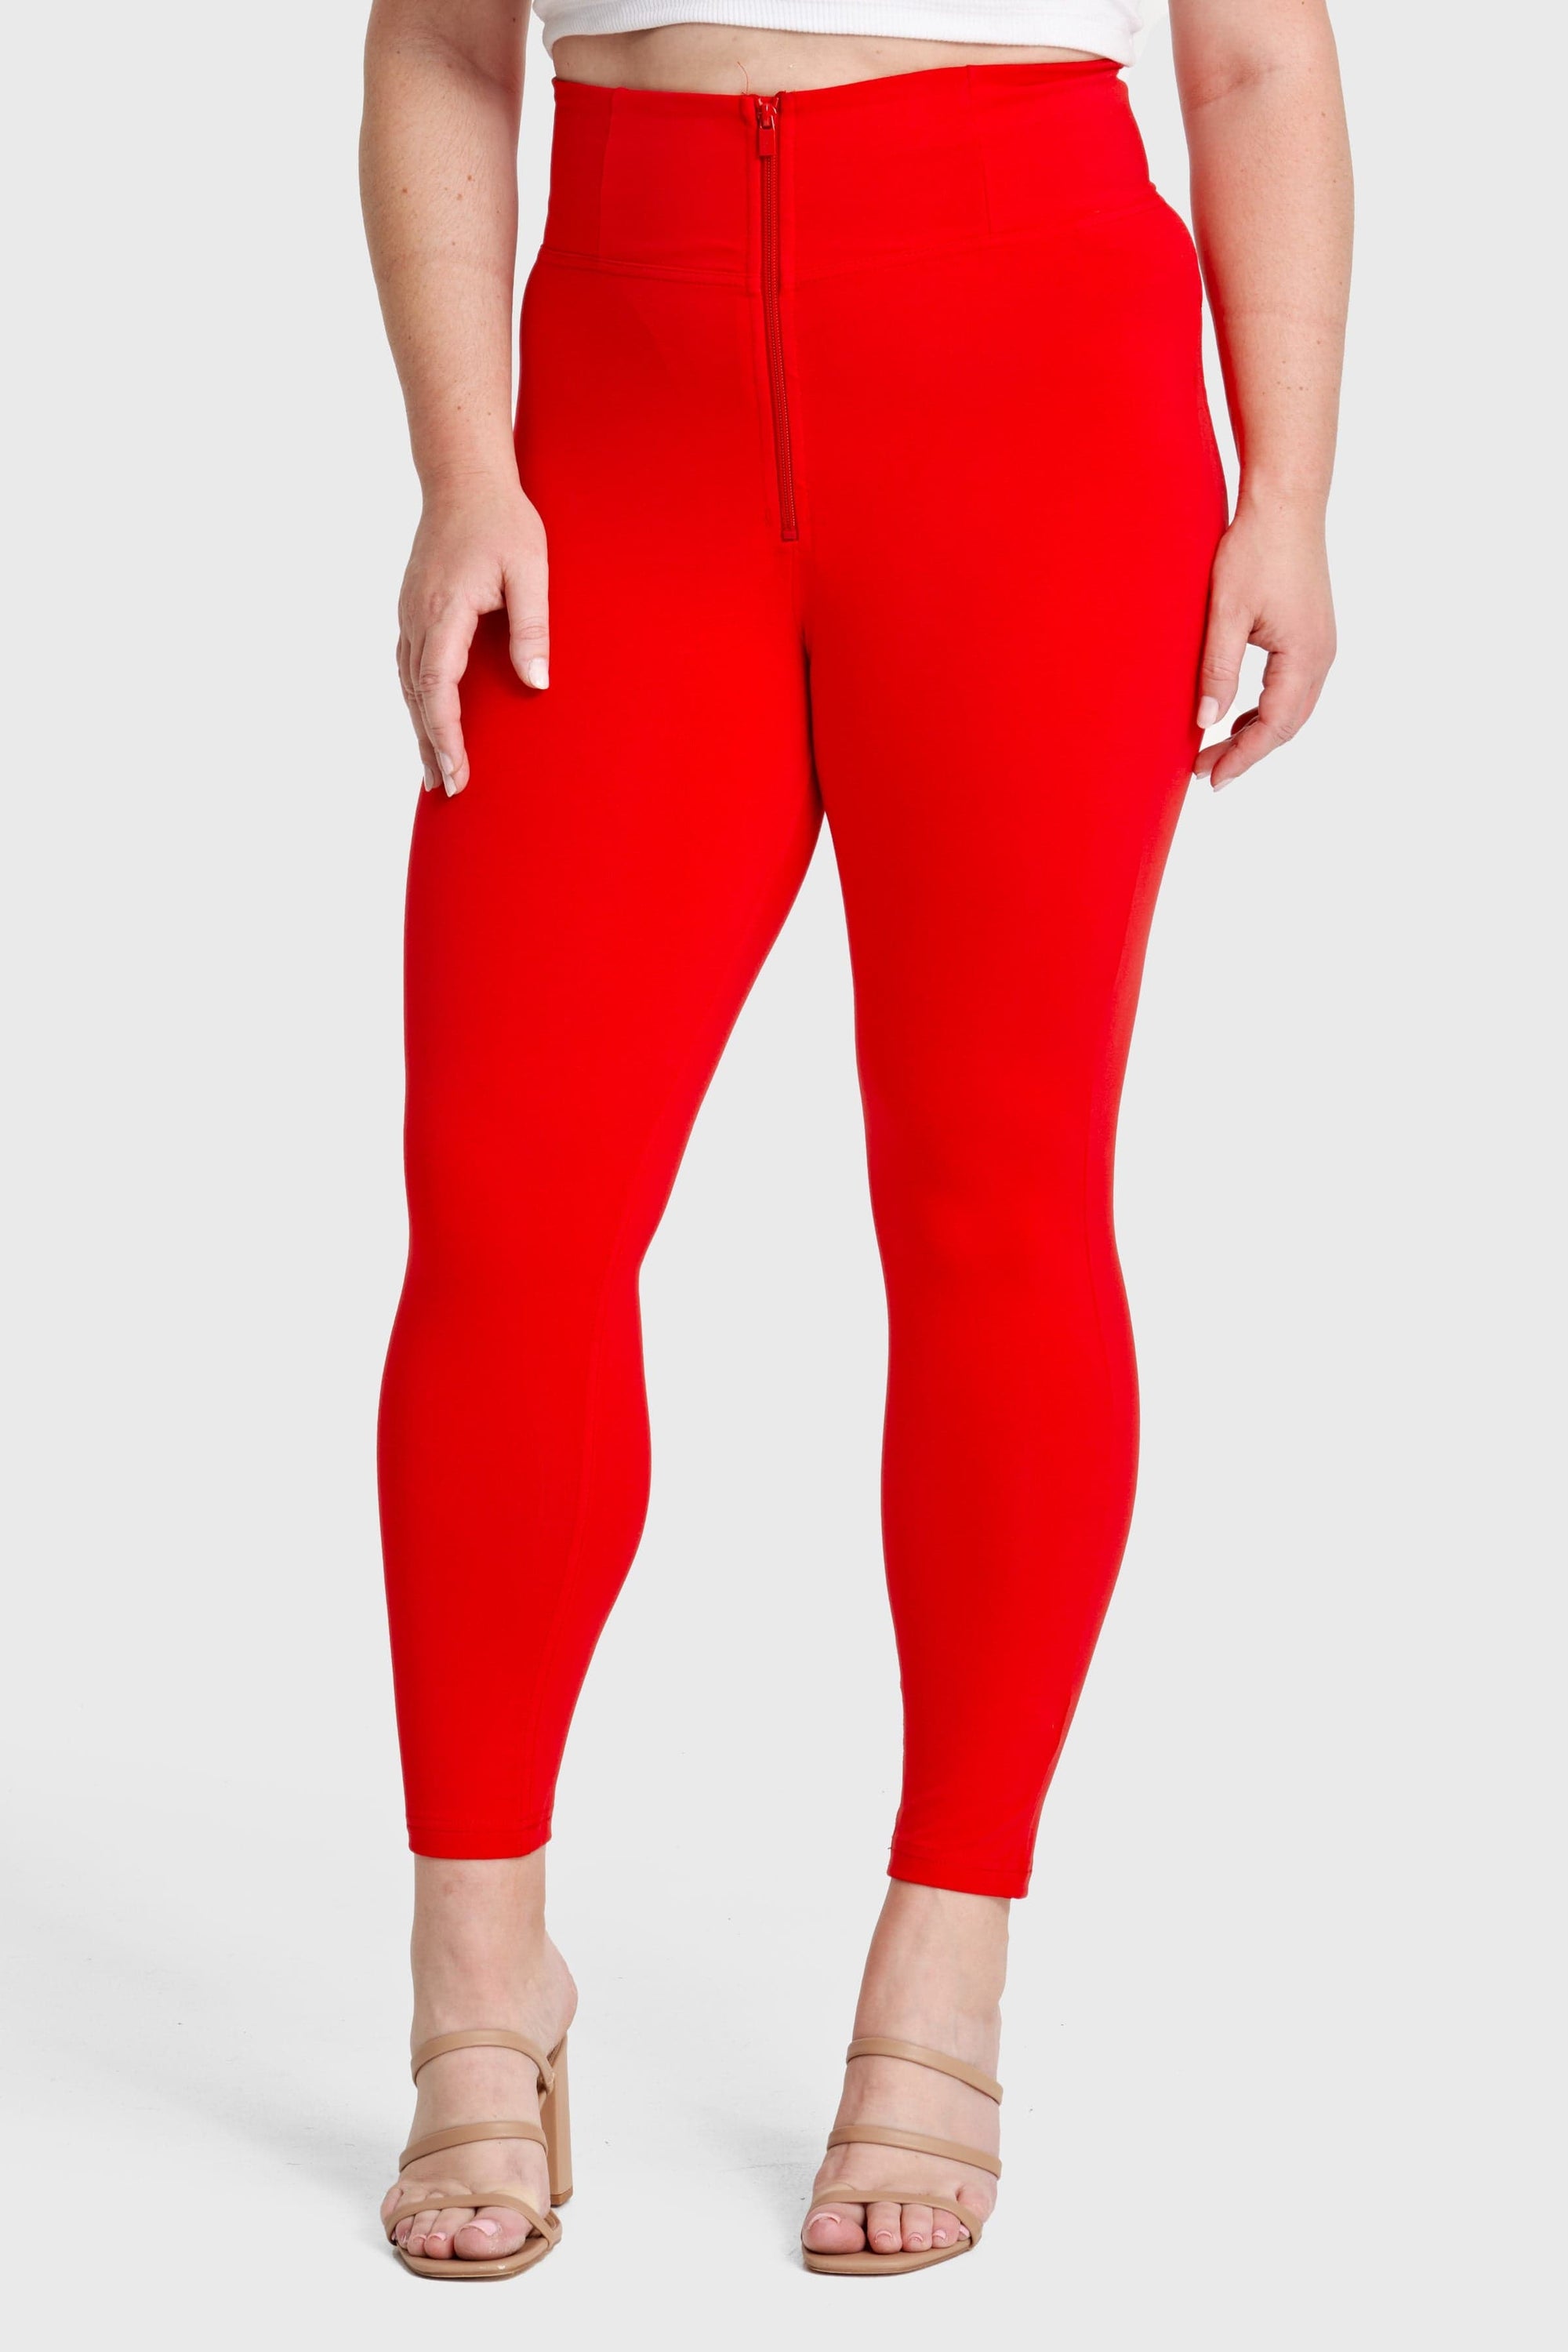 WR.UP® Curvy Fashion - Zip High Waisted - Petite Length - Red 1